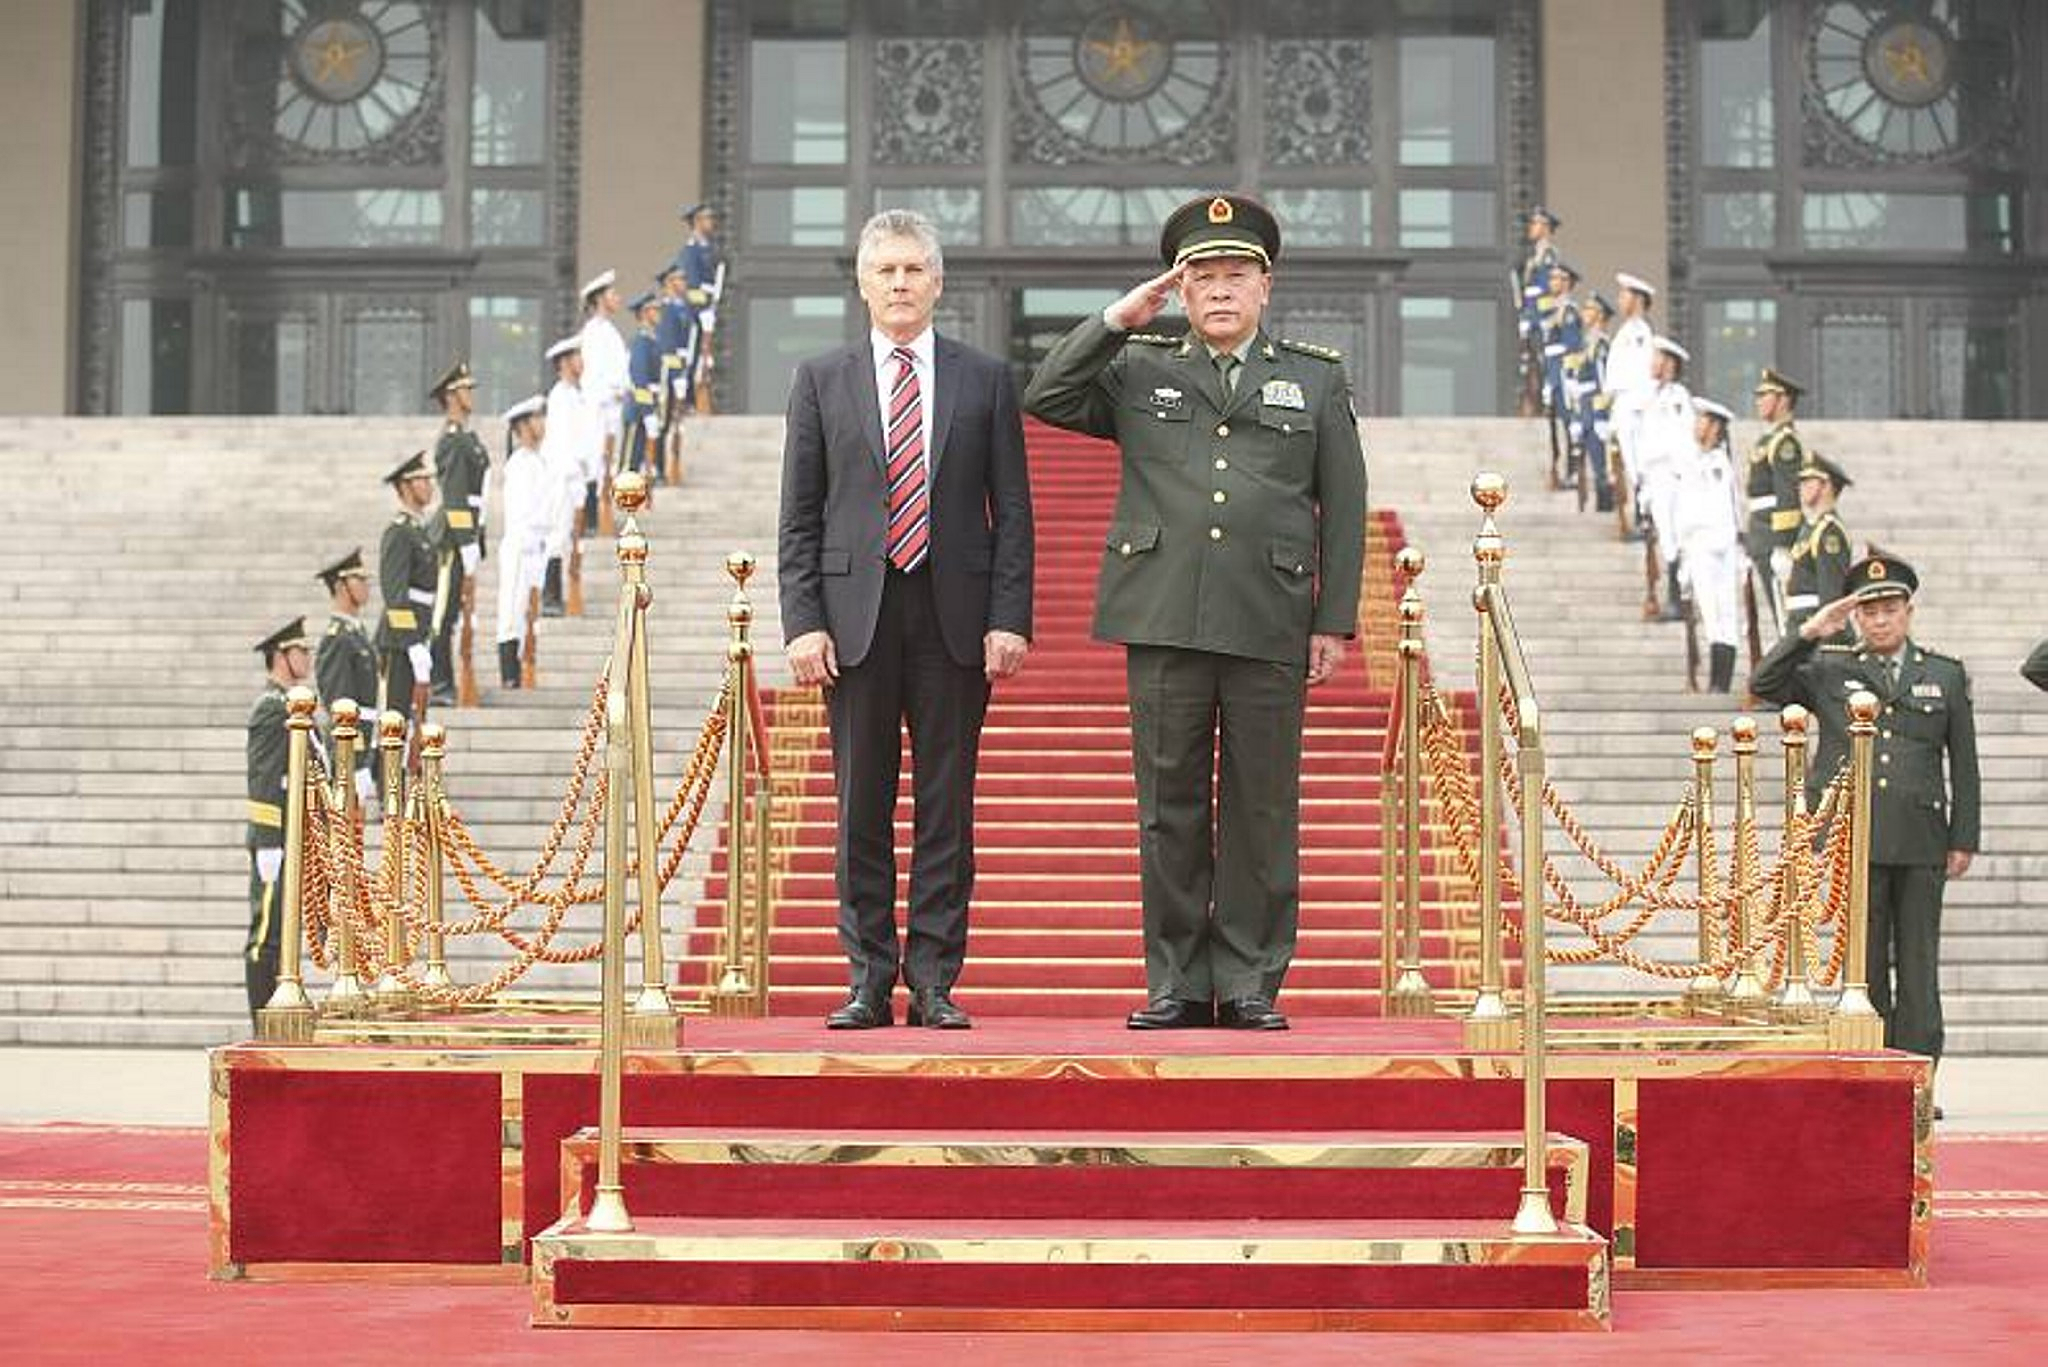 Minister Smith and General Liang